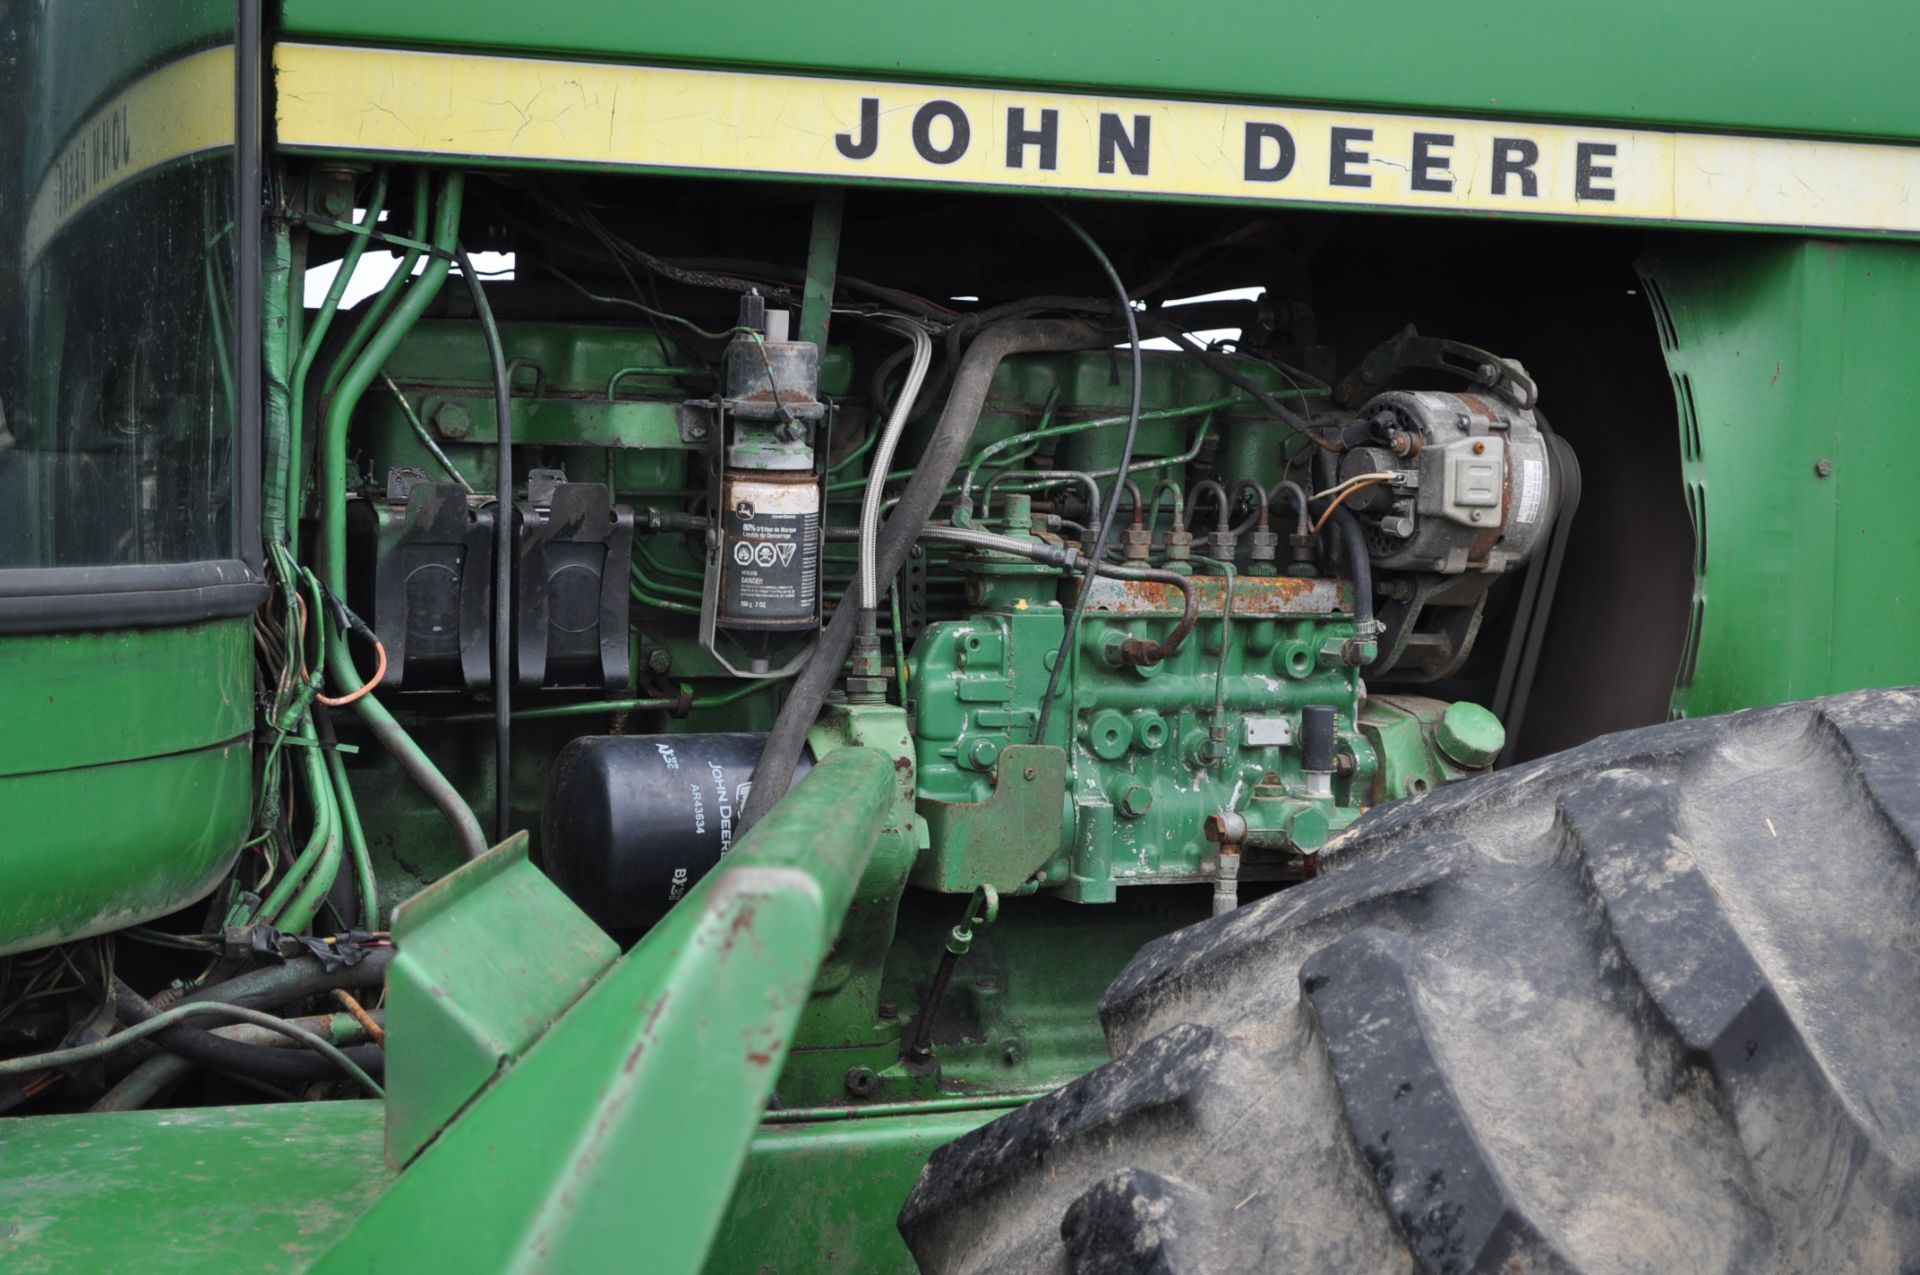 John Deere 8430 tractor, 4WD, diesel, 20.8-34 duals, CHA, Quad range, 3 hyd remotes, 1000 pto, 3 pt, - Image 9 of 19